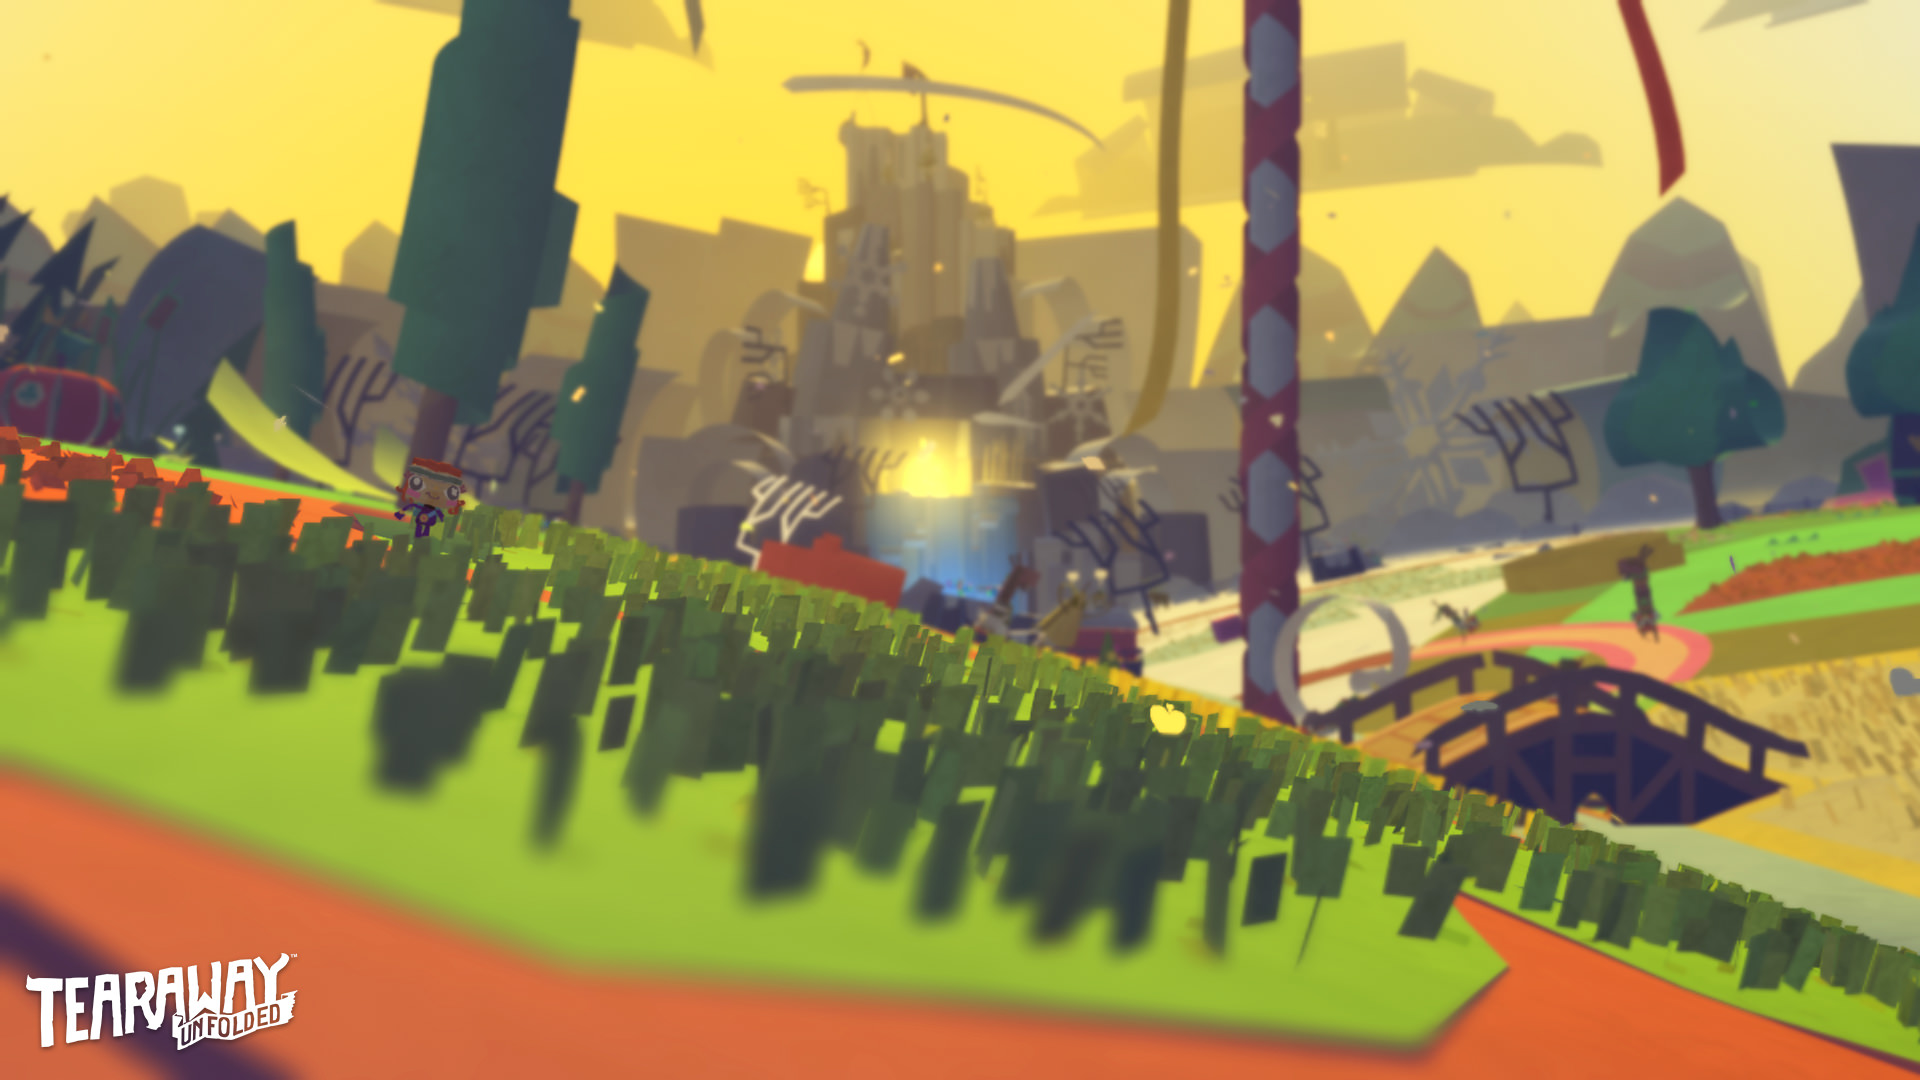 Images of Tearaway Unfolded | 1920x1080